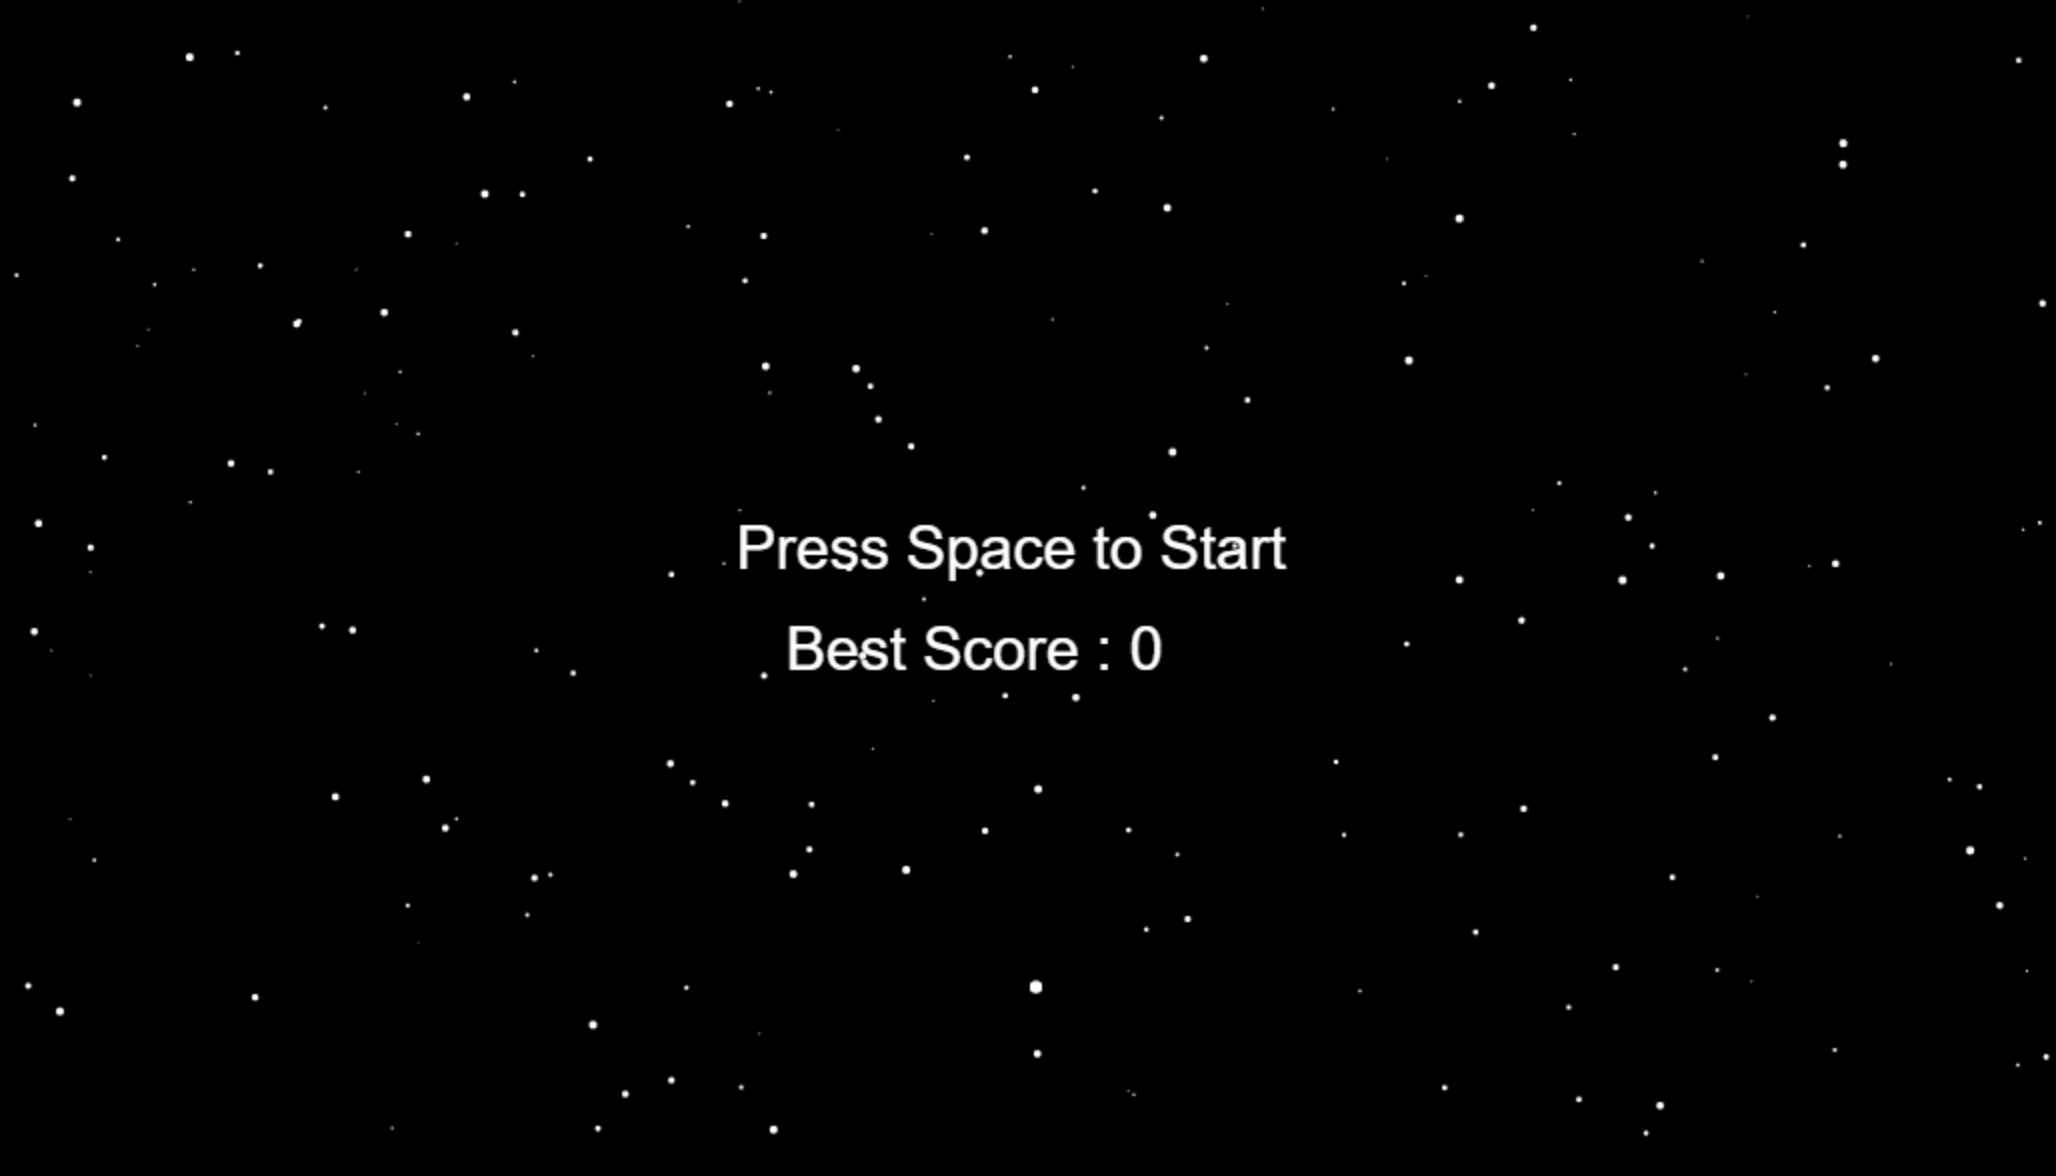 Space invader game in JS